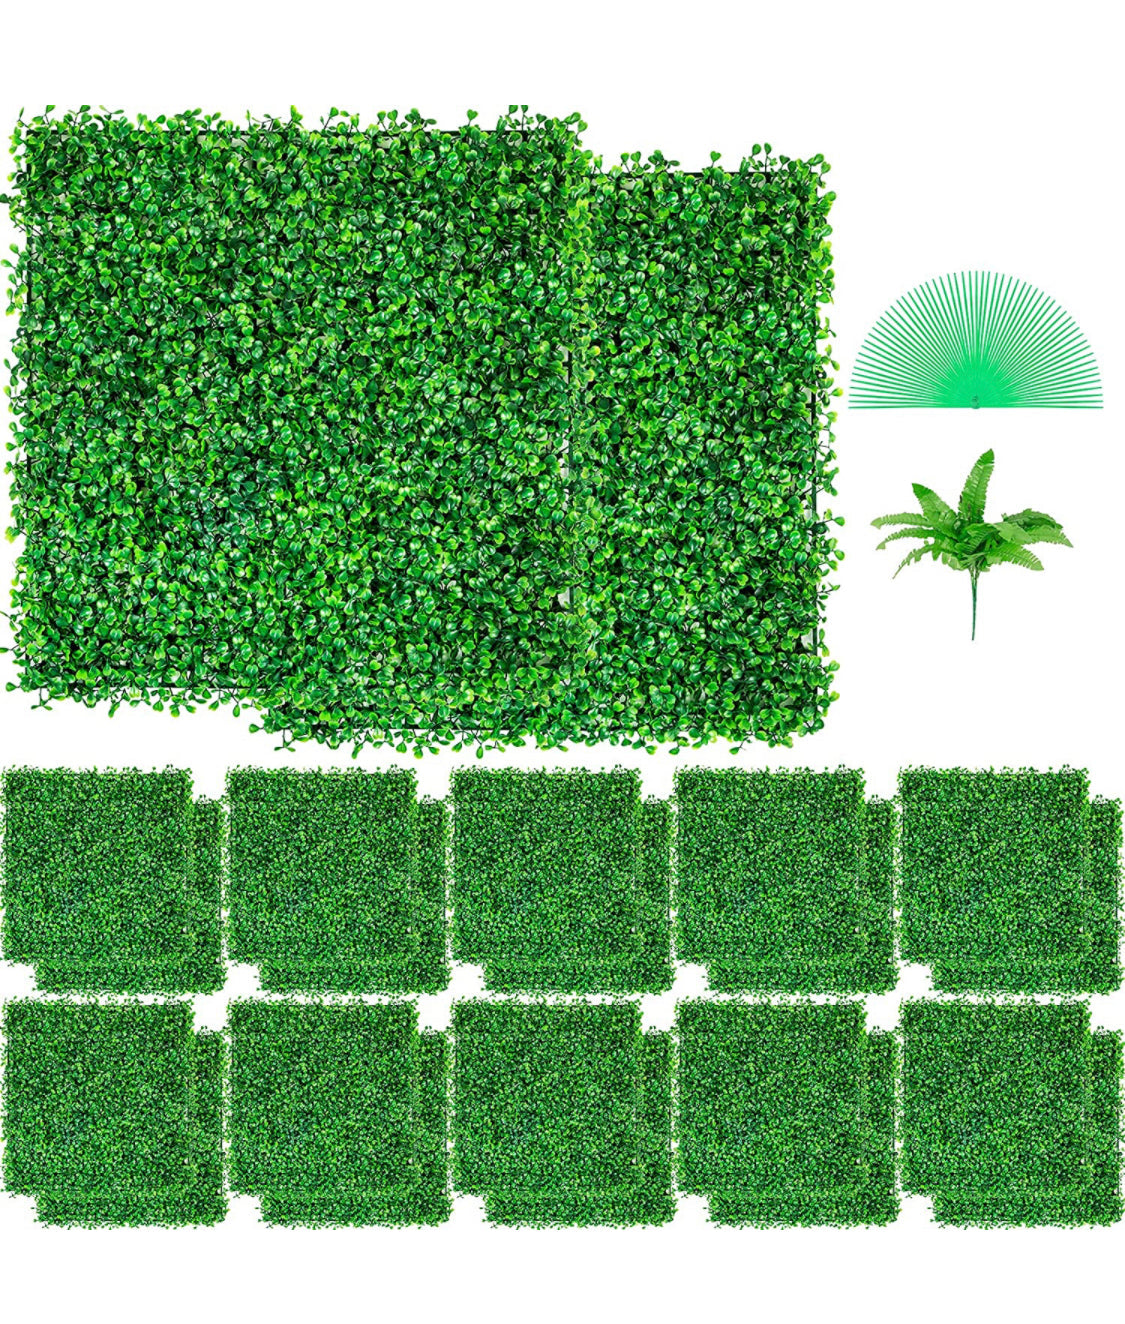 24pcs Grass Wall Artificial Boxwood Panels, 10" x 10", Topiary Hedge Plant w/UV Protection, Privacy Fence Screen for Outdoor Indoor Garden Backyard Wedding Backdrop Decor